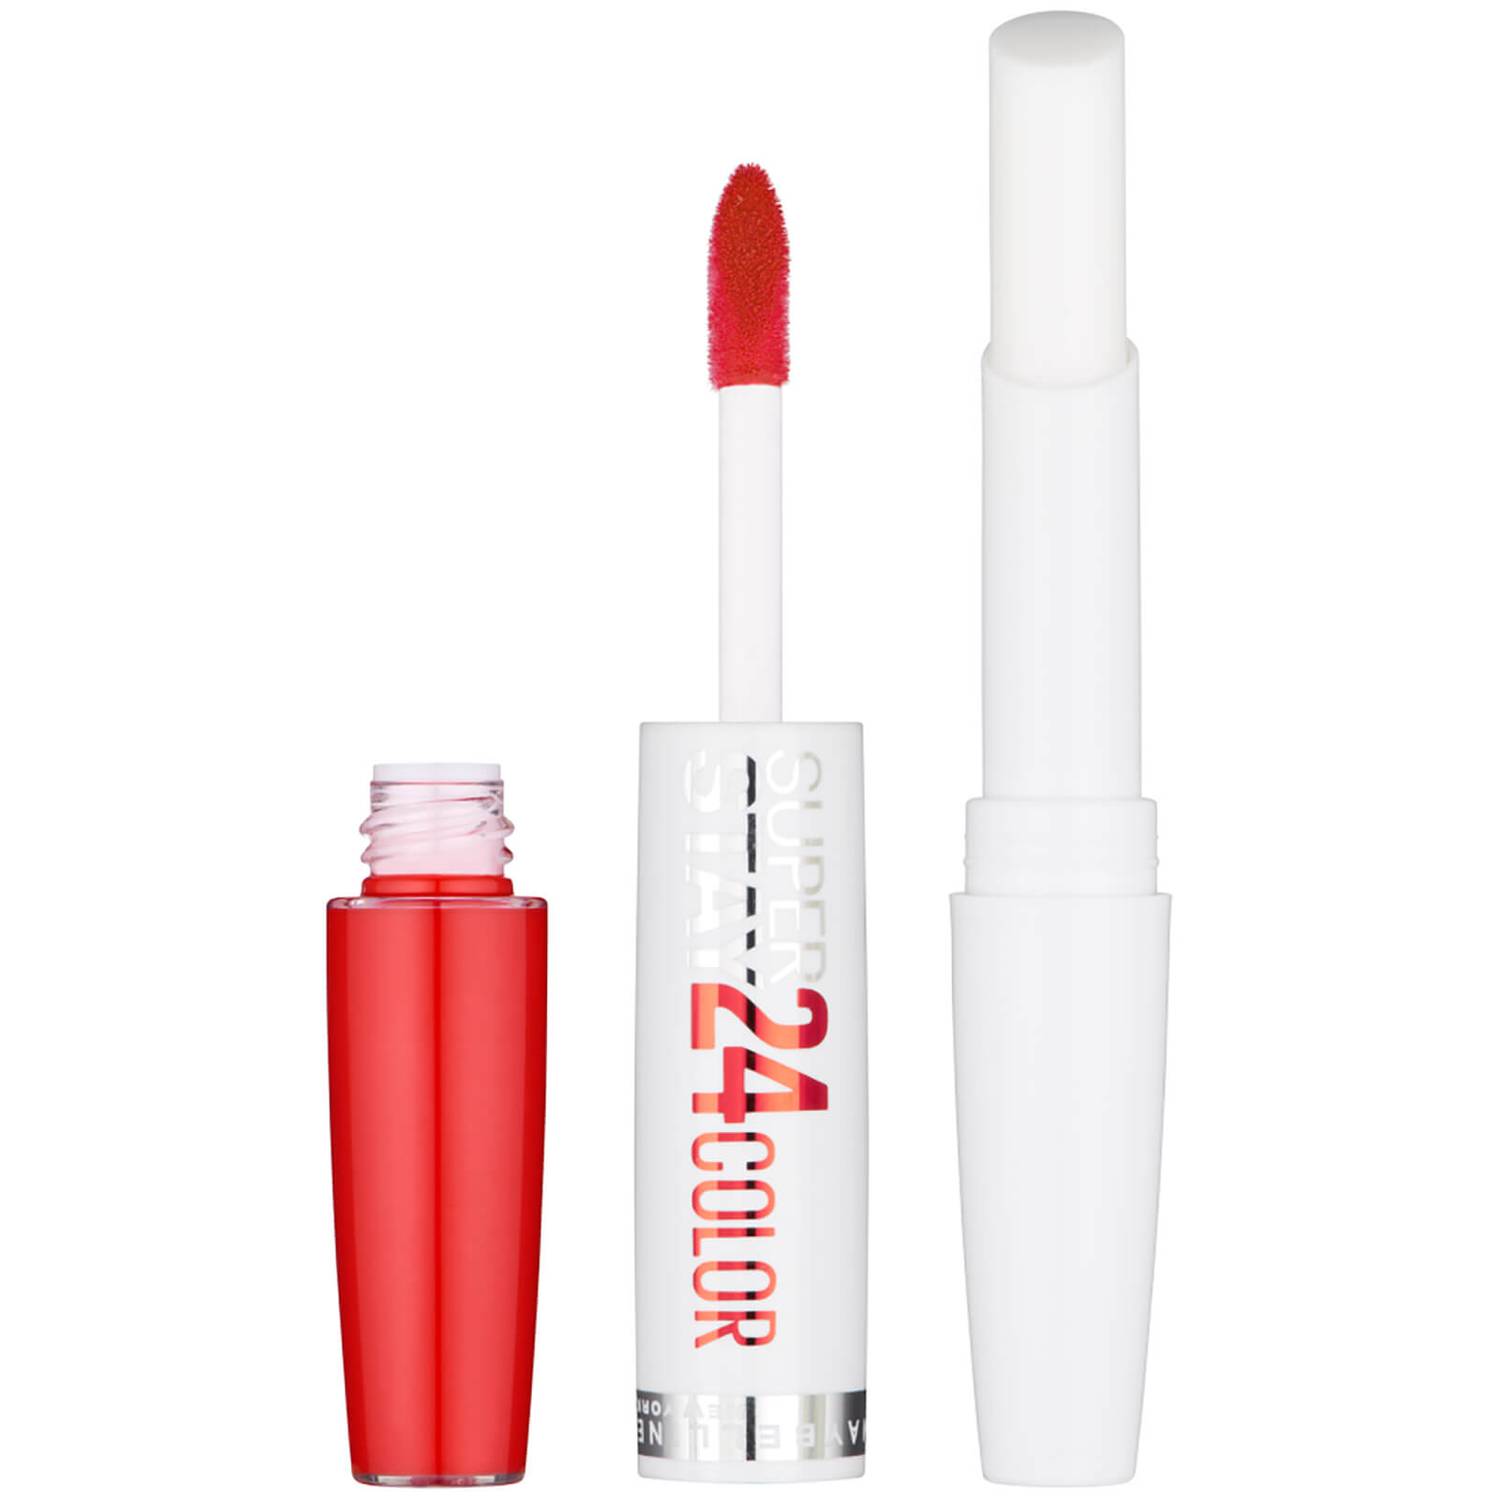 SuperStay 24H* Lip Colour, Maybelline